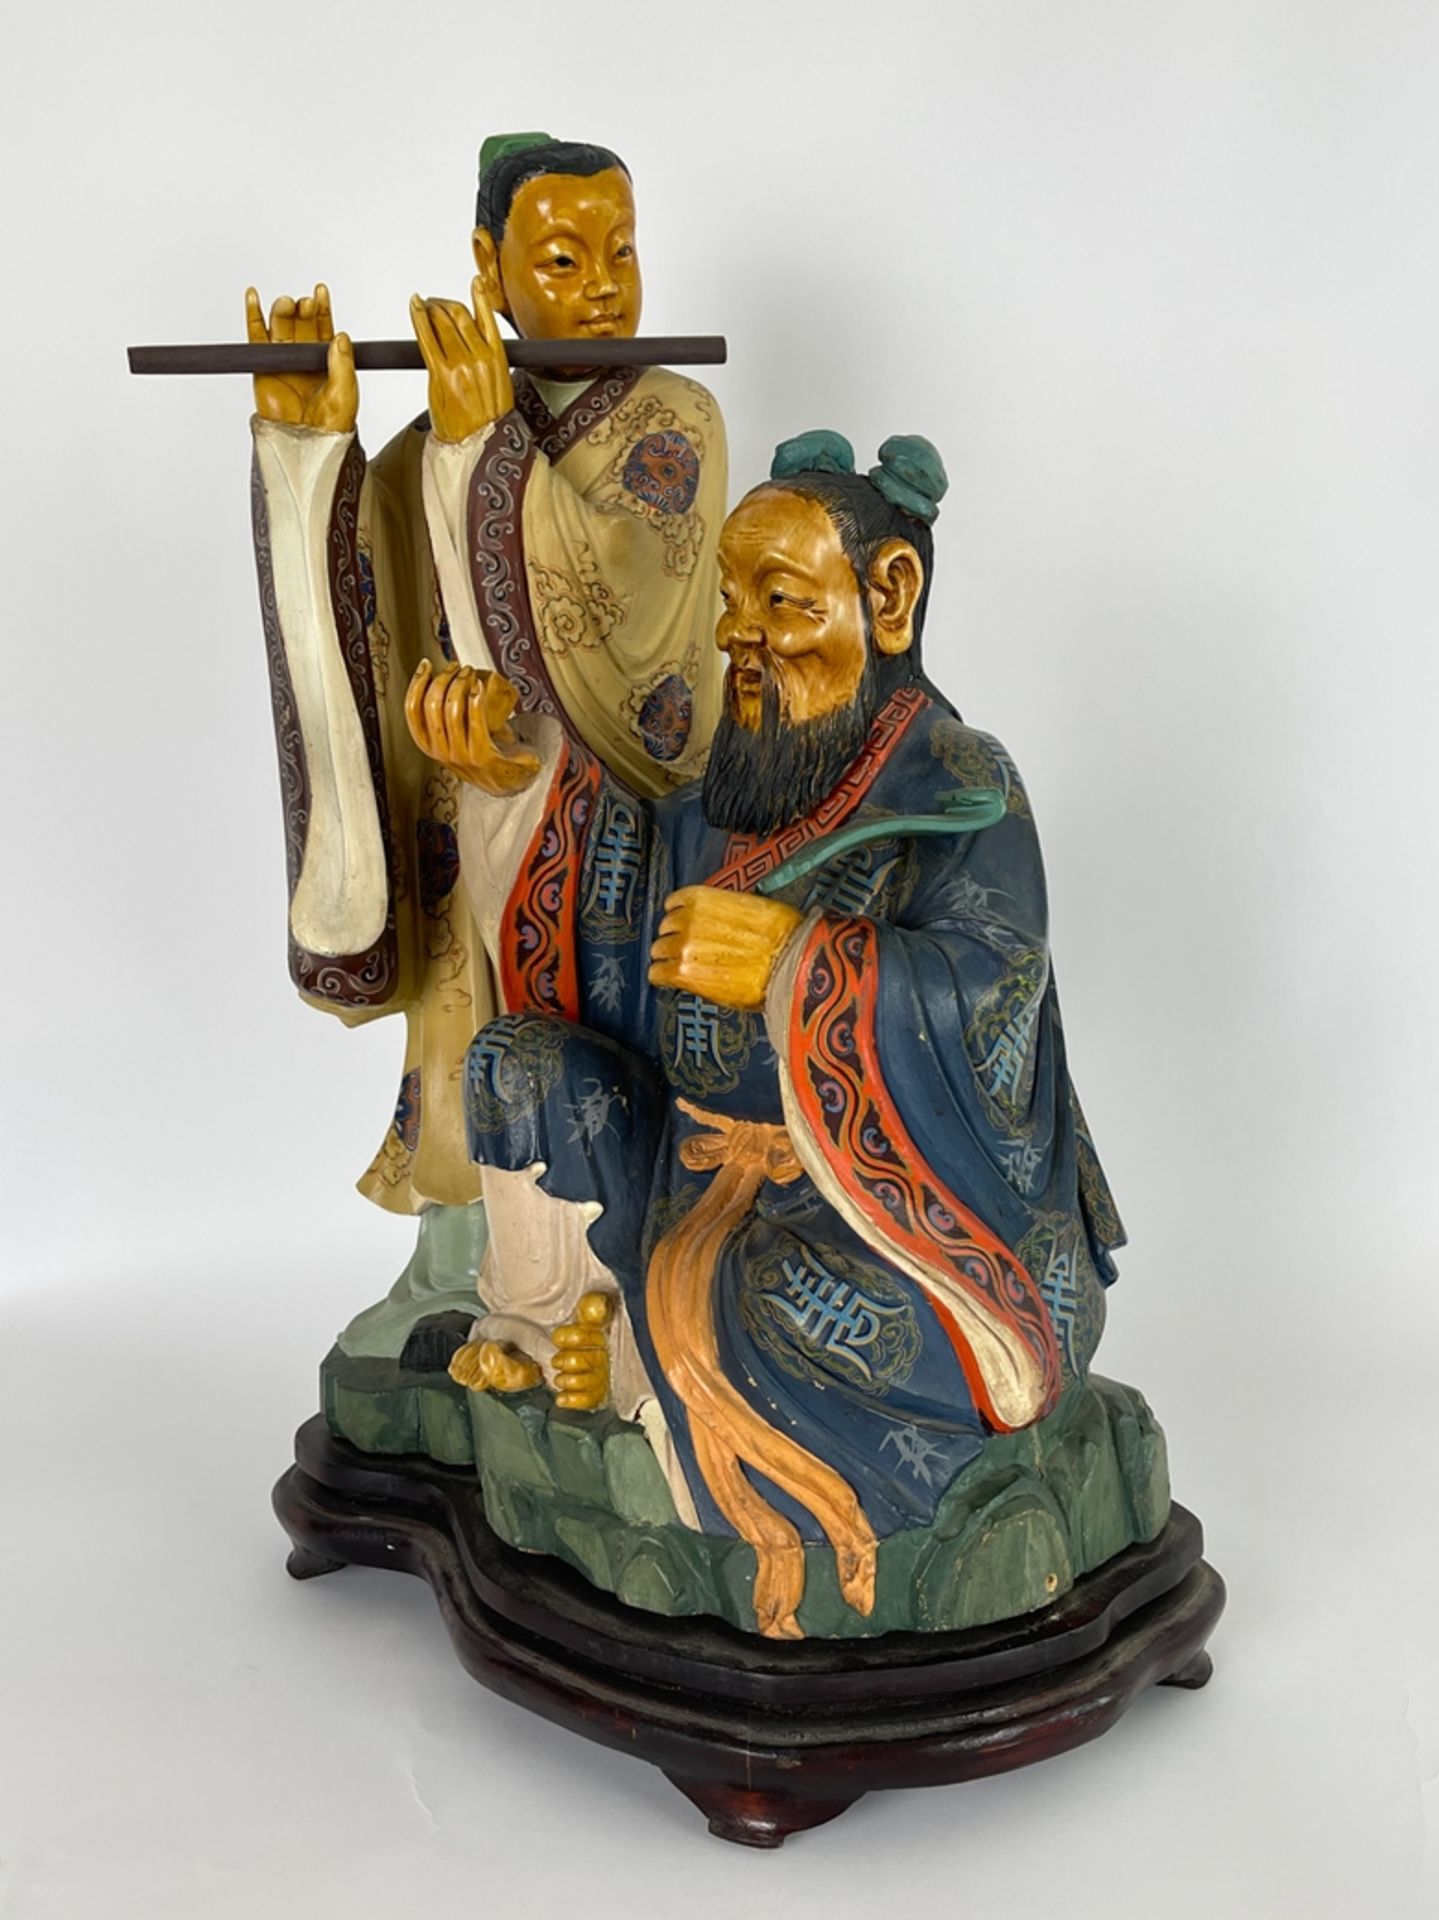 Chinese sculpture made from poplar wood and ivory - Image 3 of 13